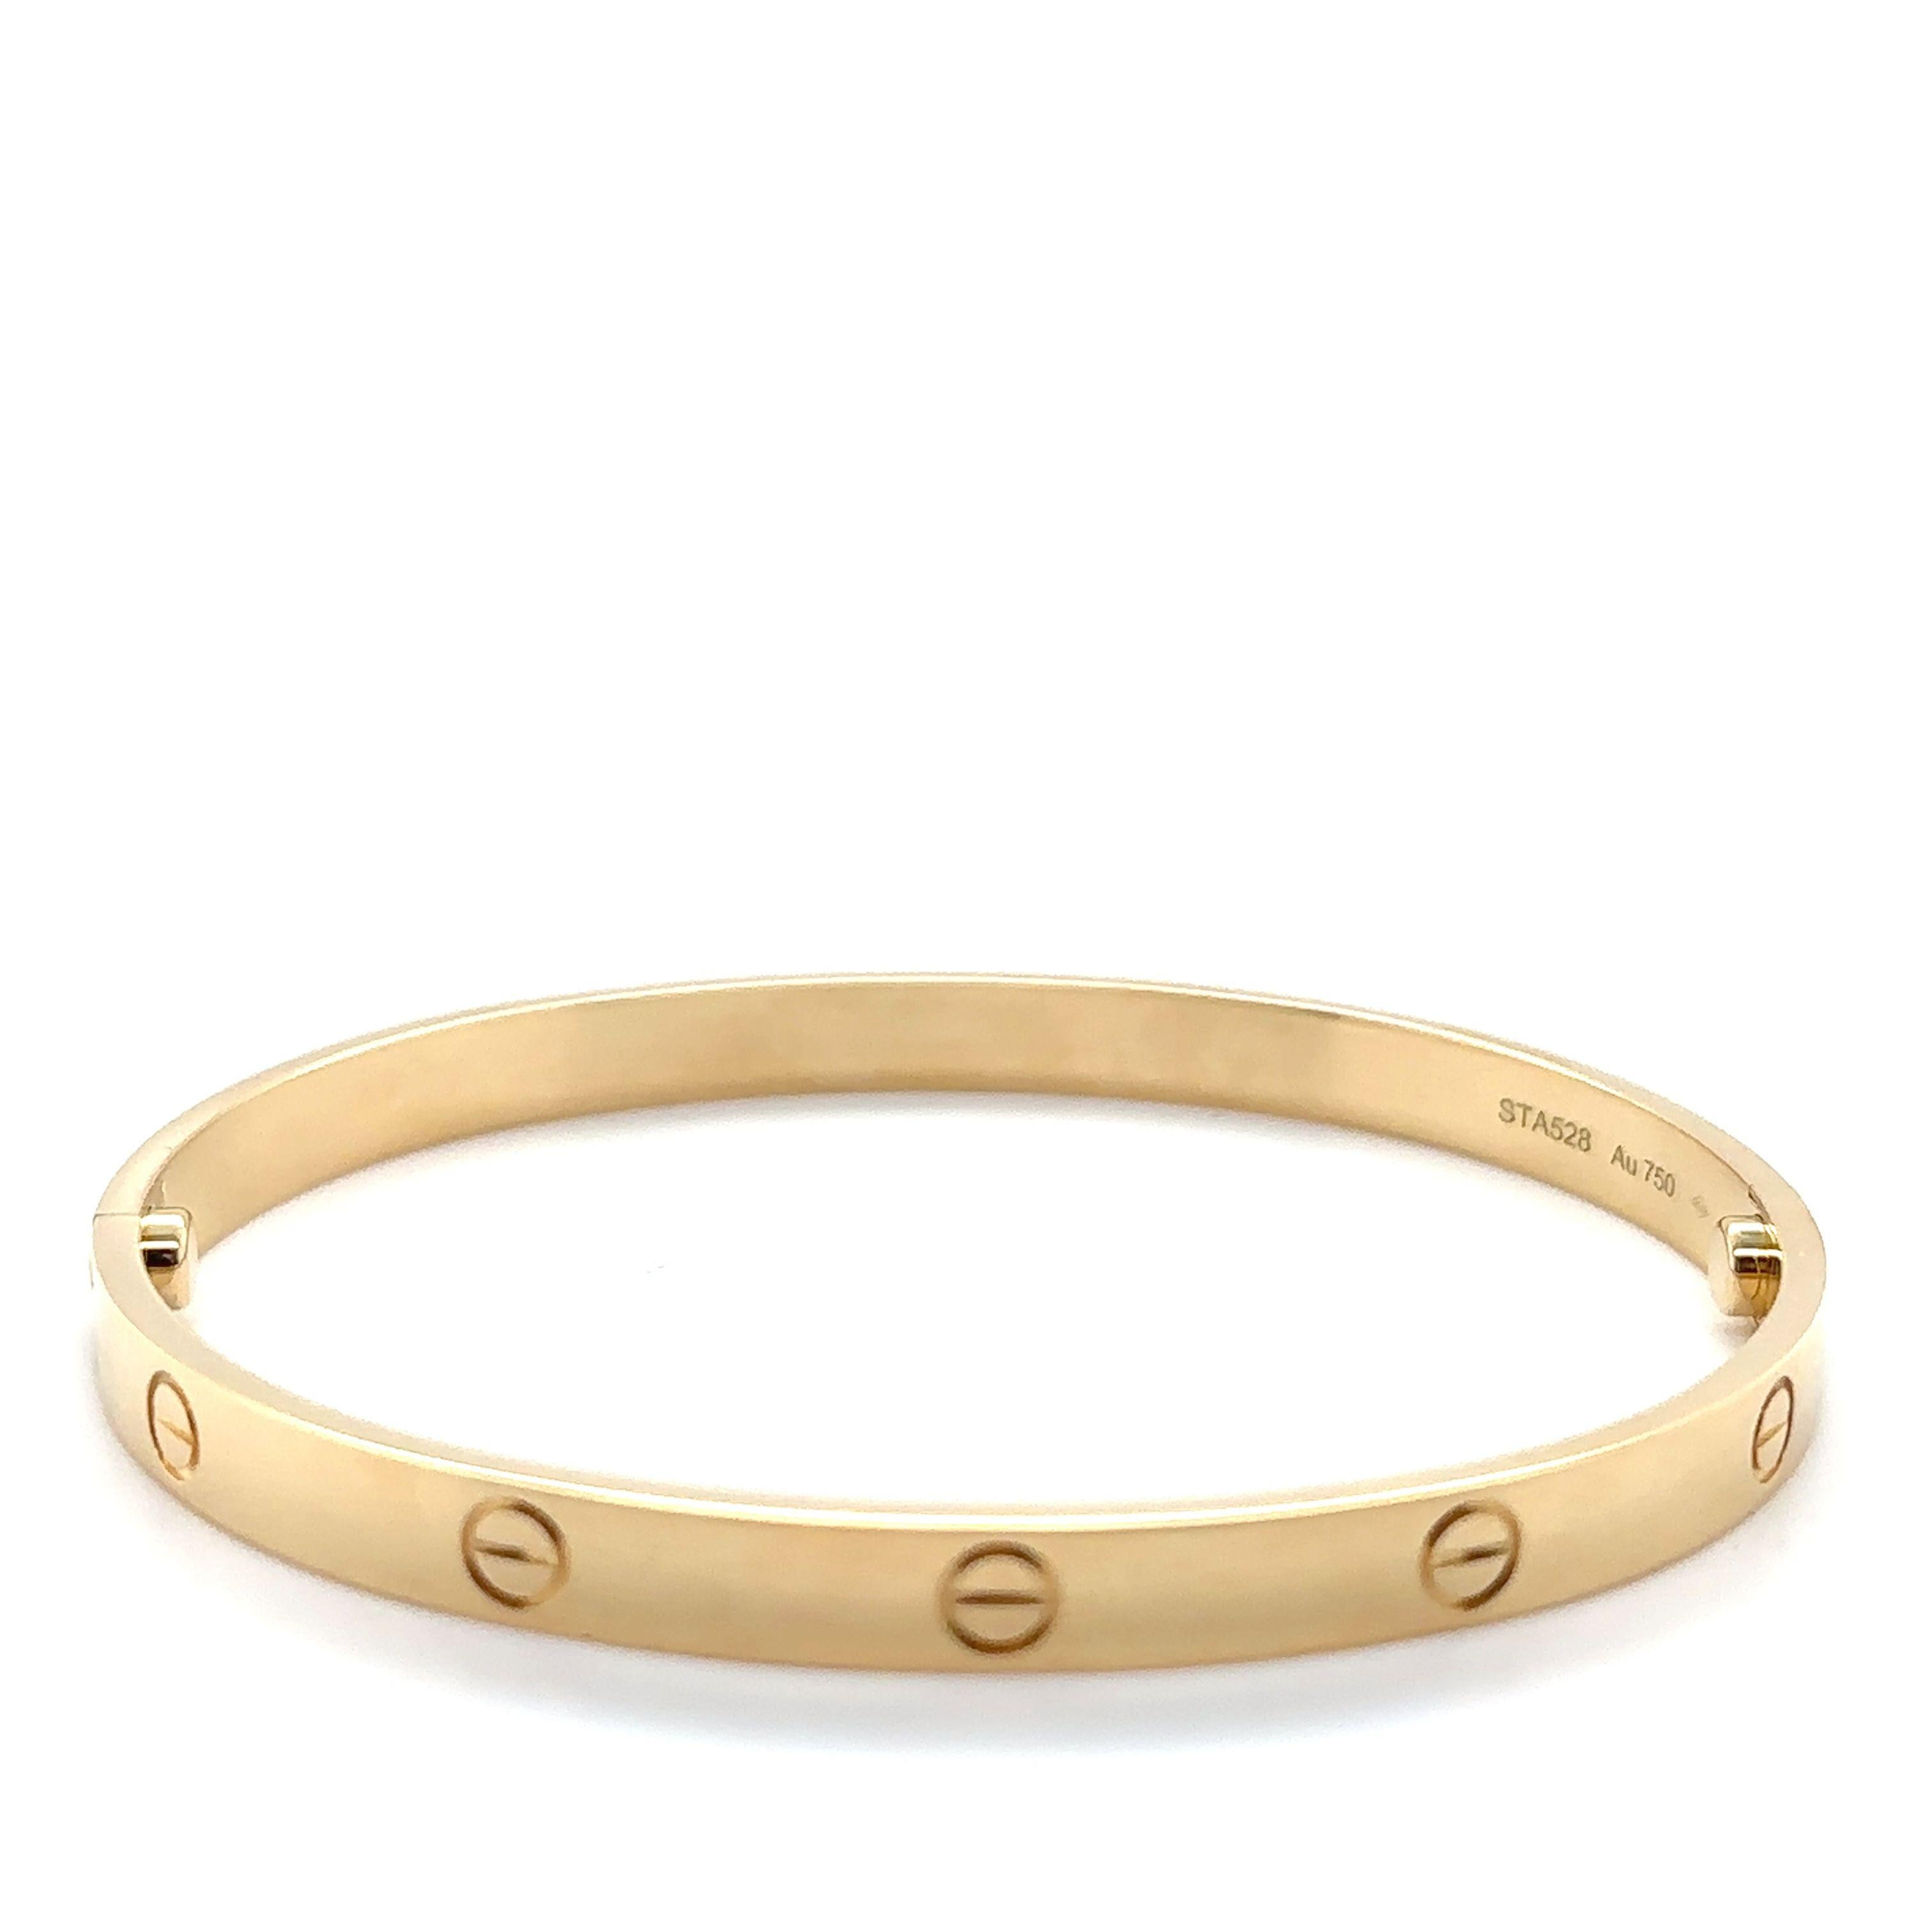 A Cartier 18ct Yellow Gold Love Bangle.

Width 6mm. Serial number: STA528, Size 21cm. Weight 38.44 grams.
Metal: 18ct Yellow Gold
Carat: N/A
Colour: N/A
Clarity:  N/A
Cut: N/A
Weight: 38.44 grams
Engravings/Markings: Cartier 21 STA528